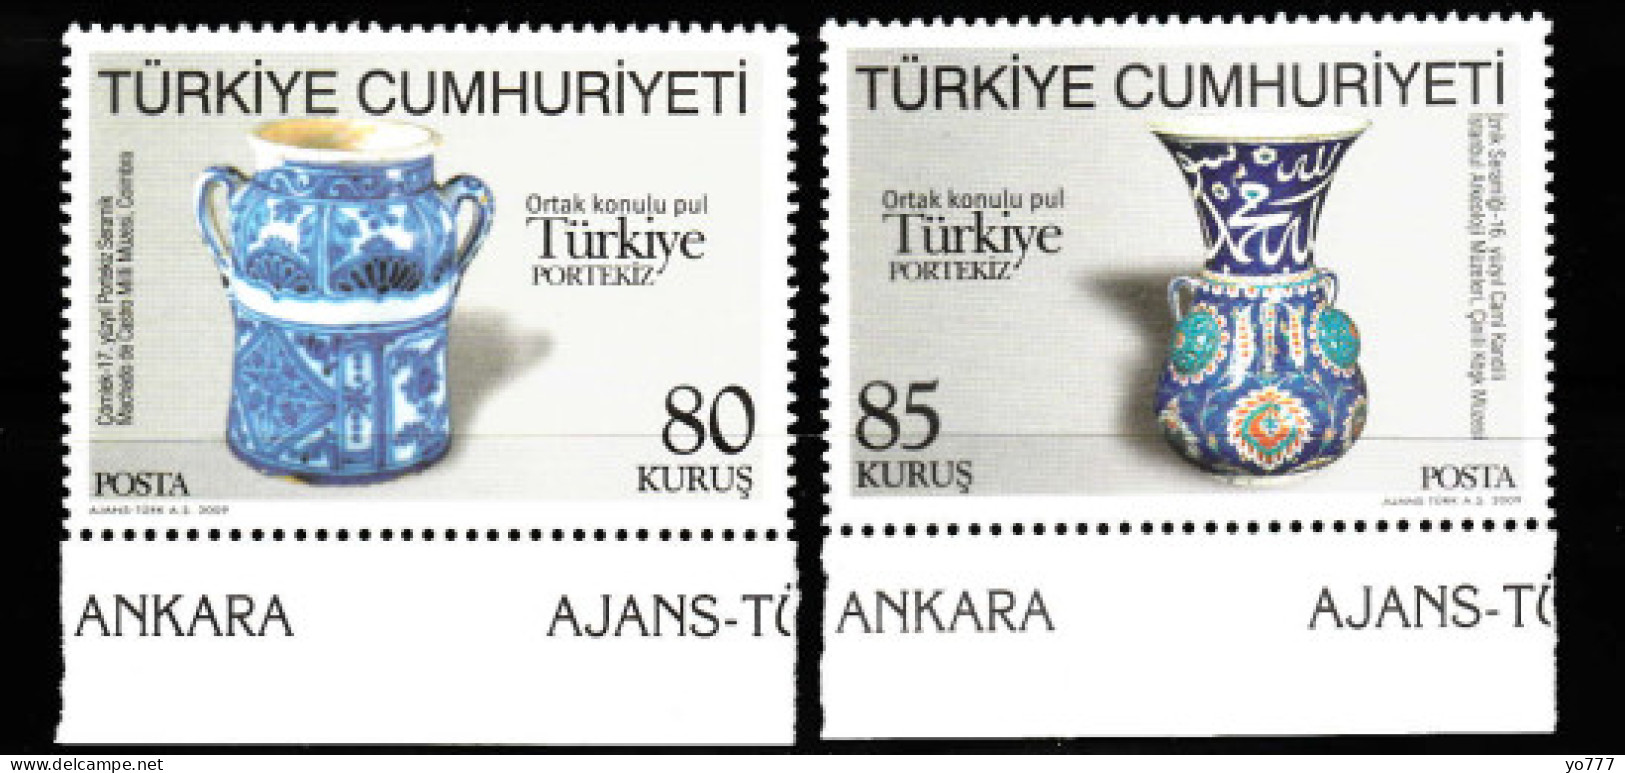 (3734-35) JOINT ISSUE OF STAMPS BETWEEN TURKEY-PORTUGAL MNH ** - Ungebraucht